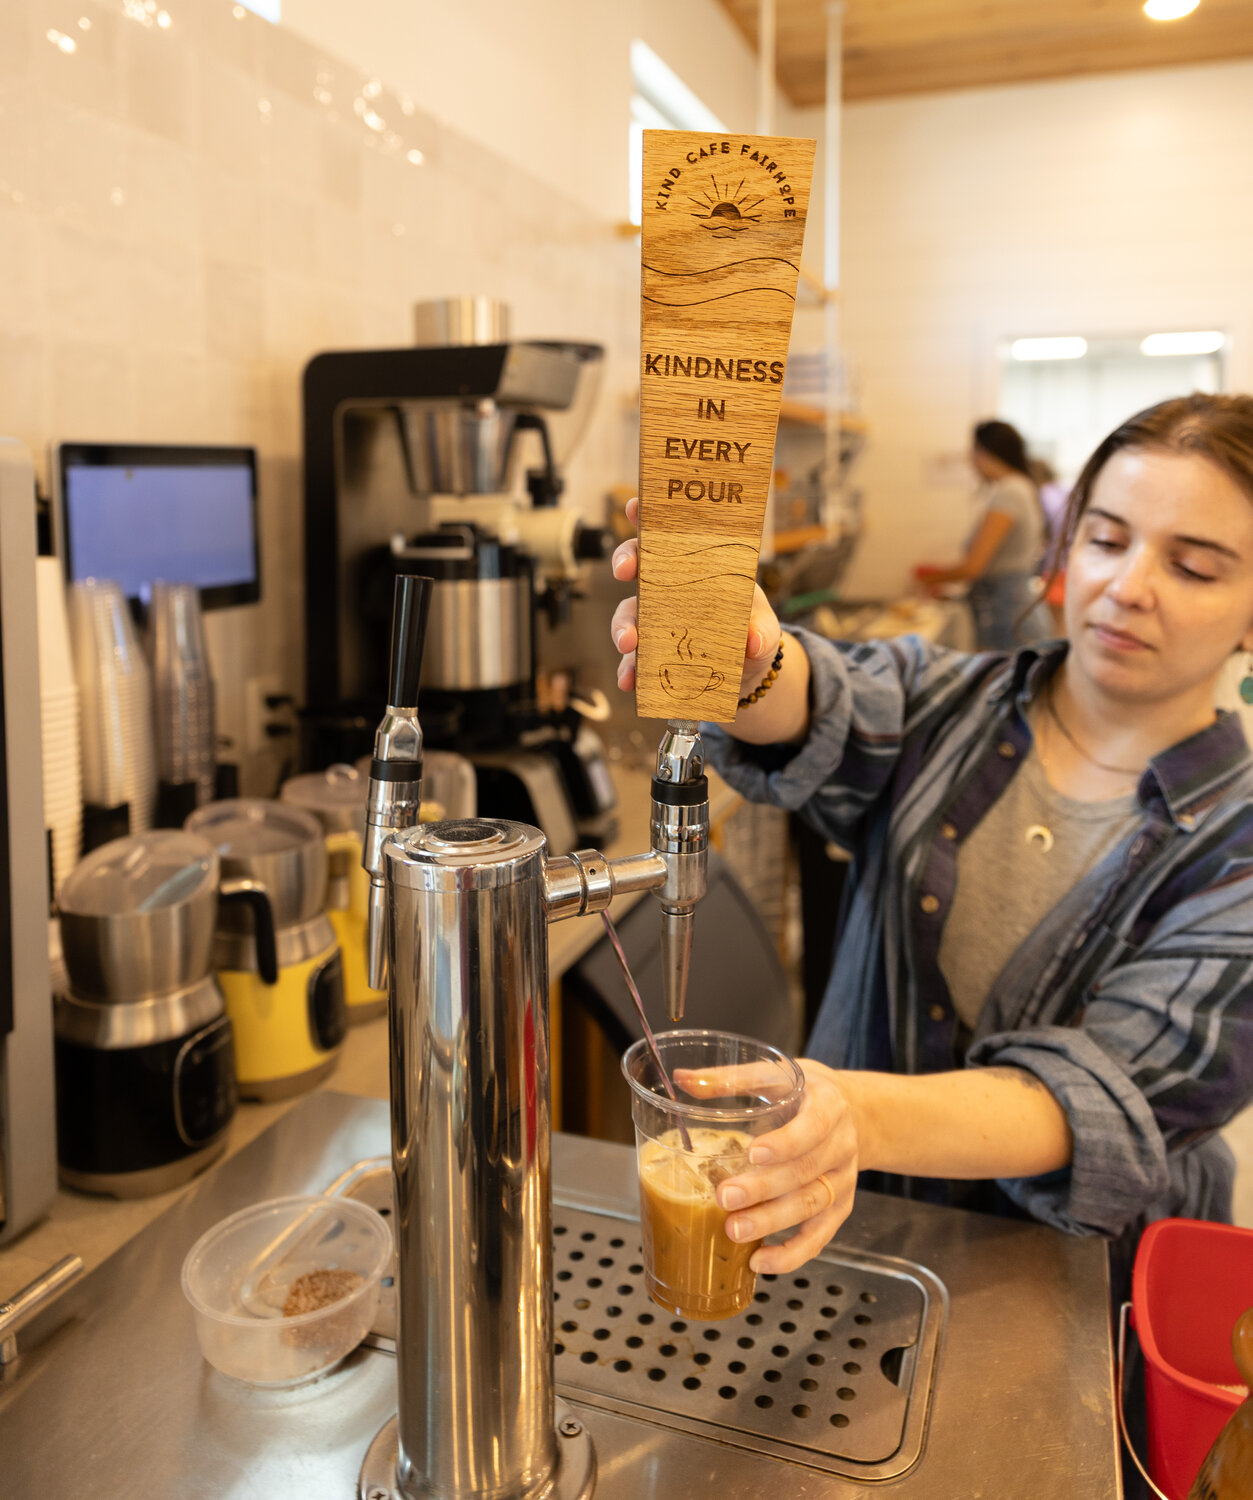 While Kind Café introduces new recipes annually, they aim to retain customer favorites. “This year we brought back the apple cider chai because it did so well last year,” said manager of Kinde Cafe Kristin Wages. “We definitely try for the most part to switch things up, but we usually have one maybe two that we keep every season.”